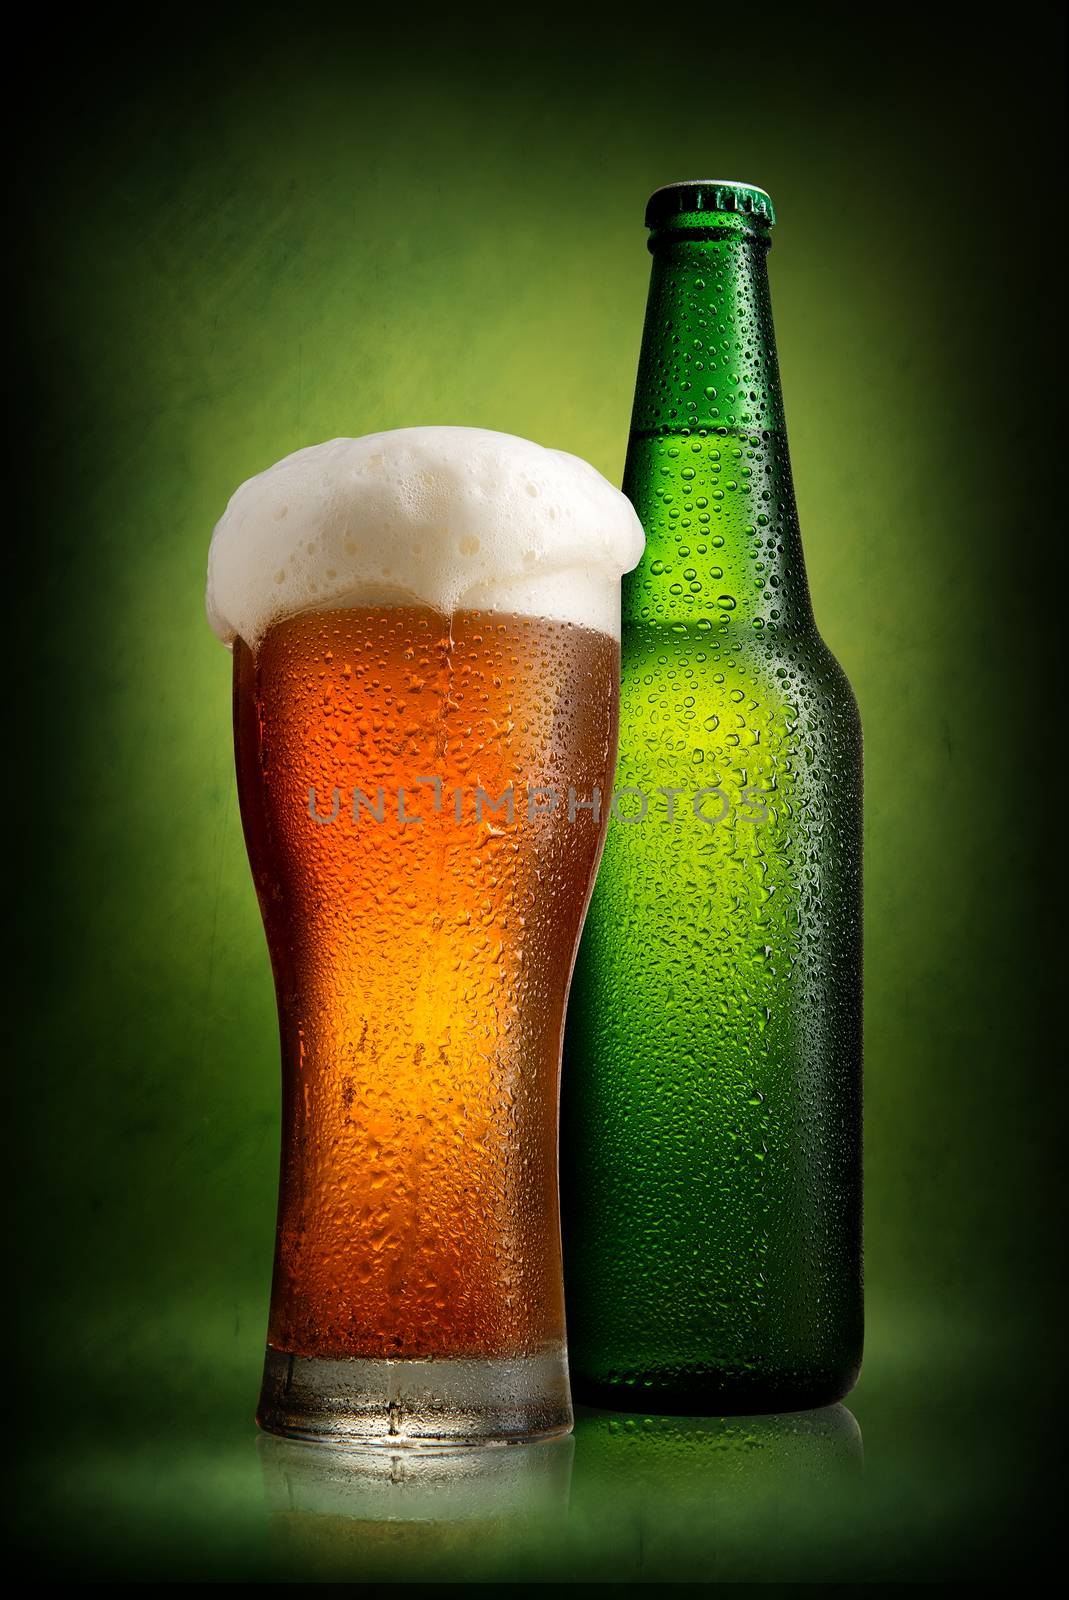 Beer in bottle and glass by Givaga